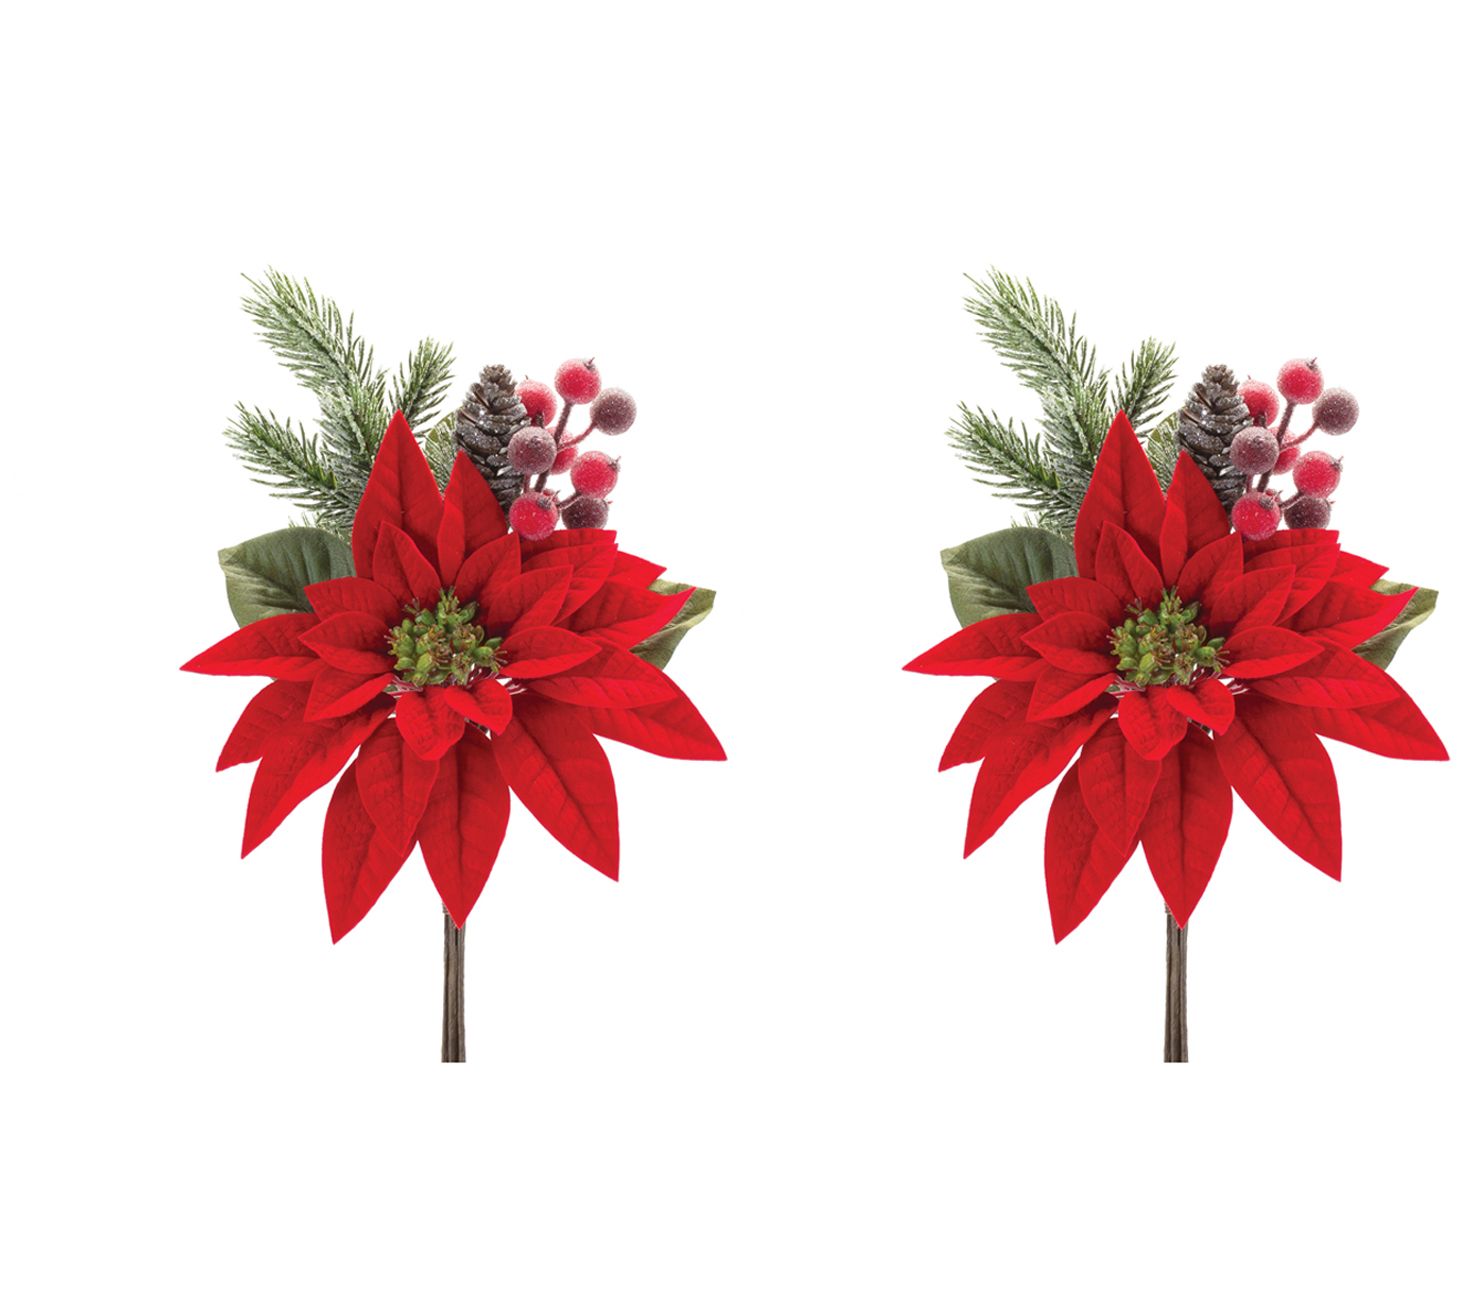 Poinsettia & Holly Perforated Scallop washi set of 2 (6mm + light